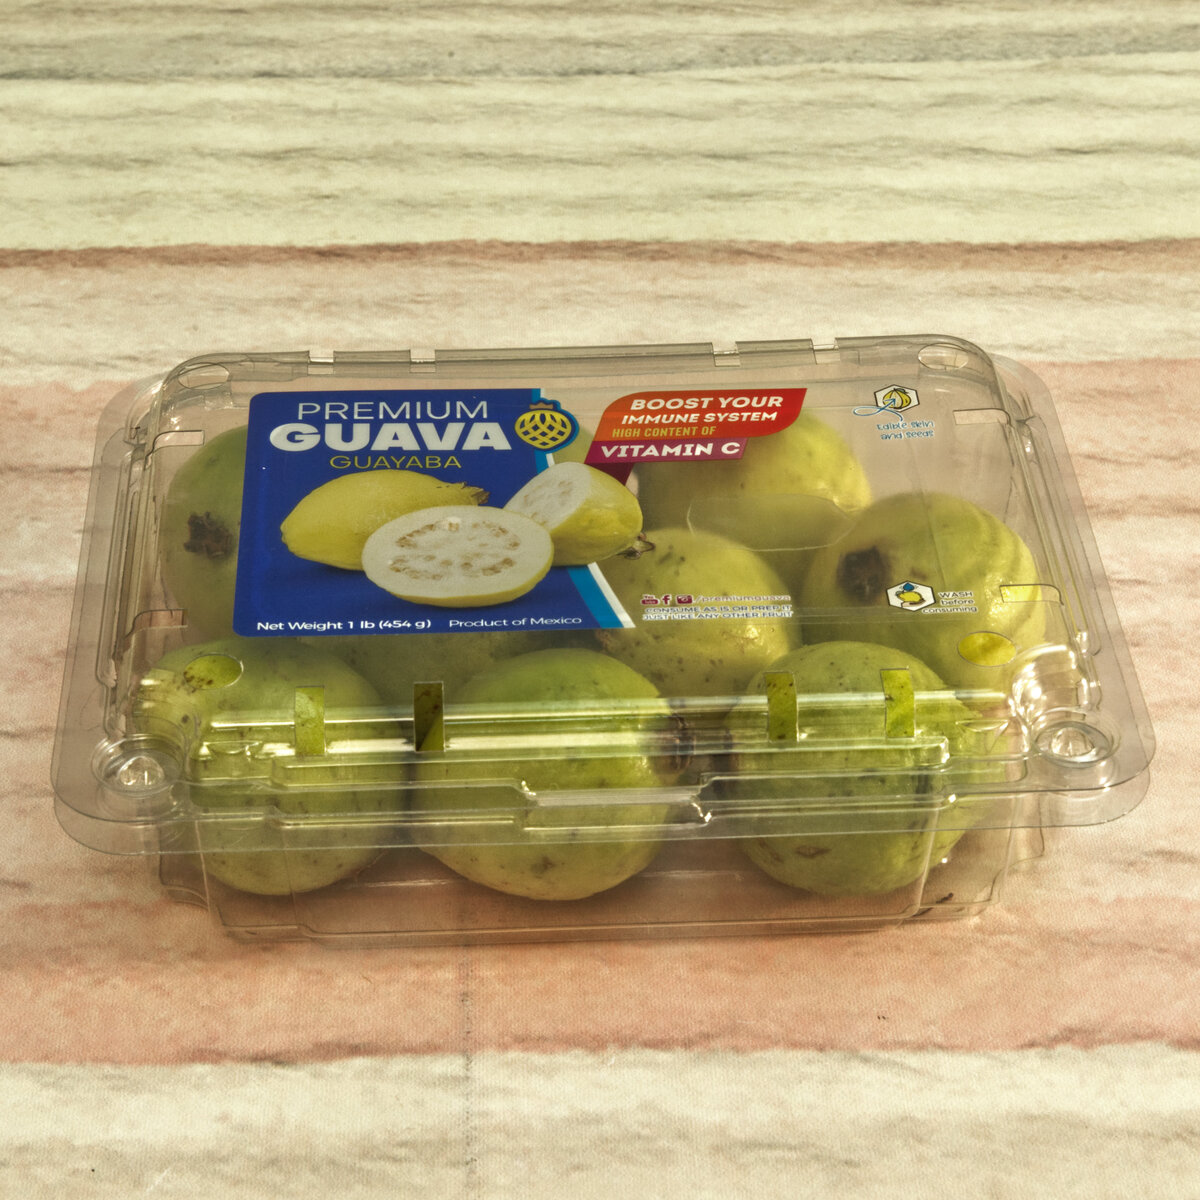 Packaged Guava